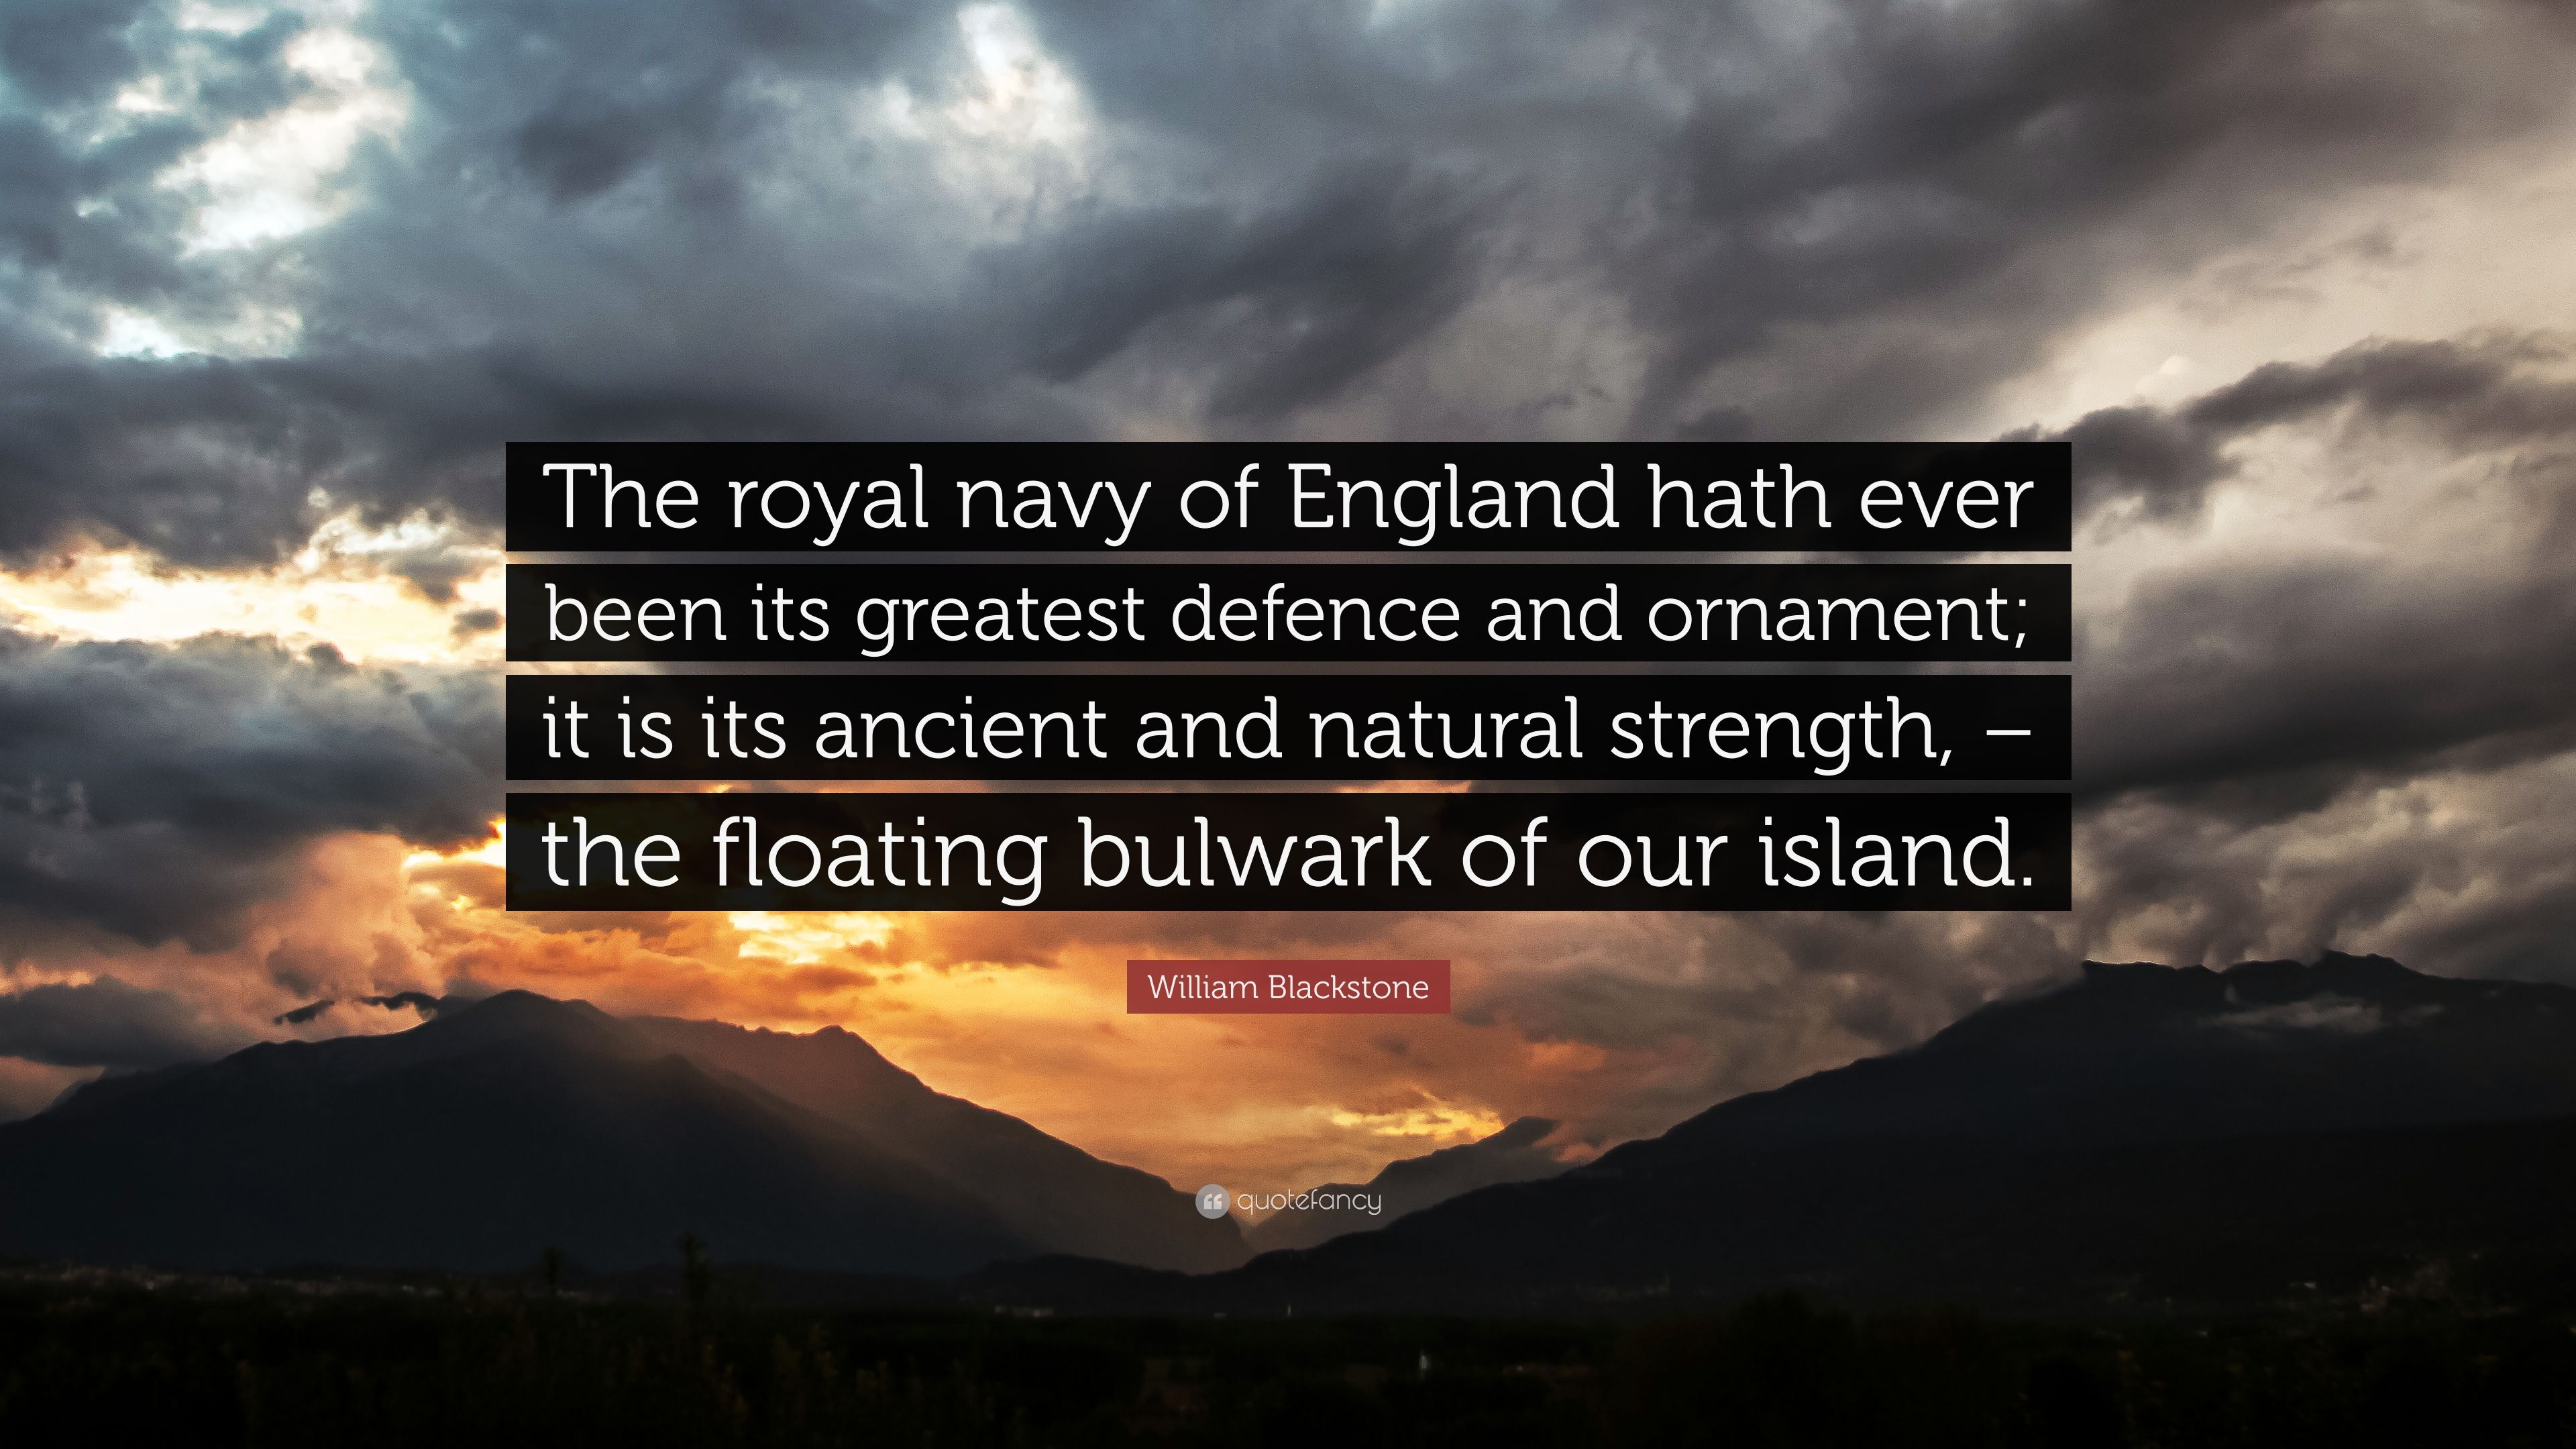 William Blackstone Quote: “The royal navy of England hath ever